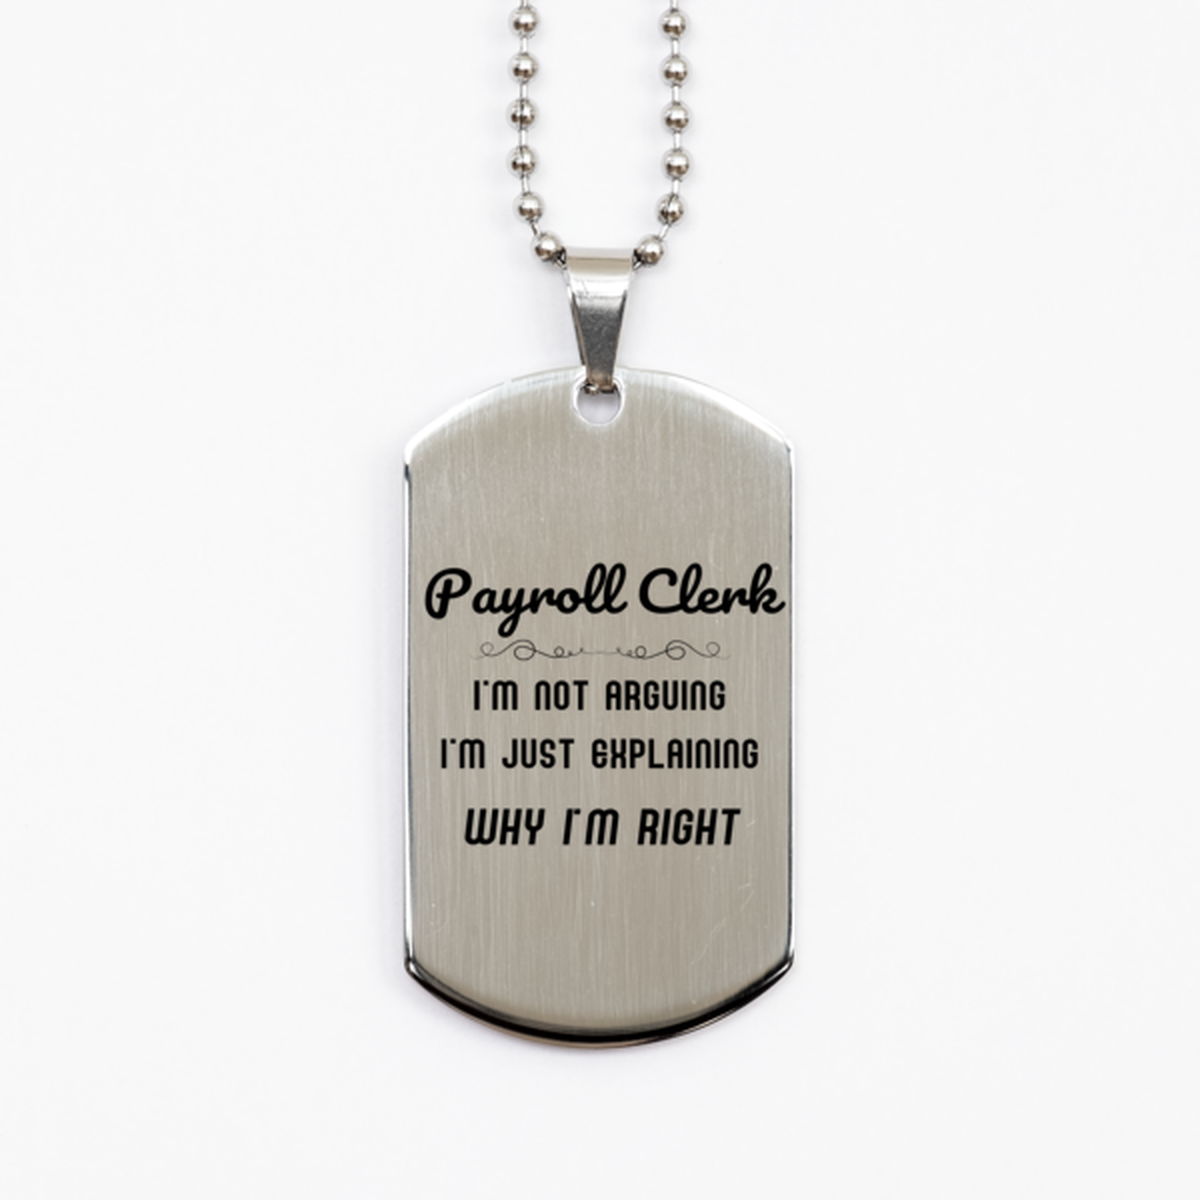 Payroll Clerk I'm not Arguing. I'm Just Explaining Why I'm RIGHT Silver Dog Tag, Funny Saying Quote Payroll Clerk Gifts For Payroll Clerk Graduation Birthday Christmas Gifts for Men Women Coworker